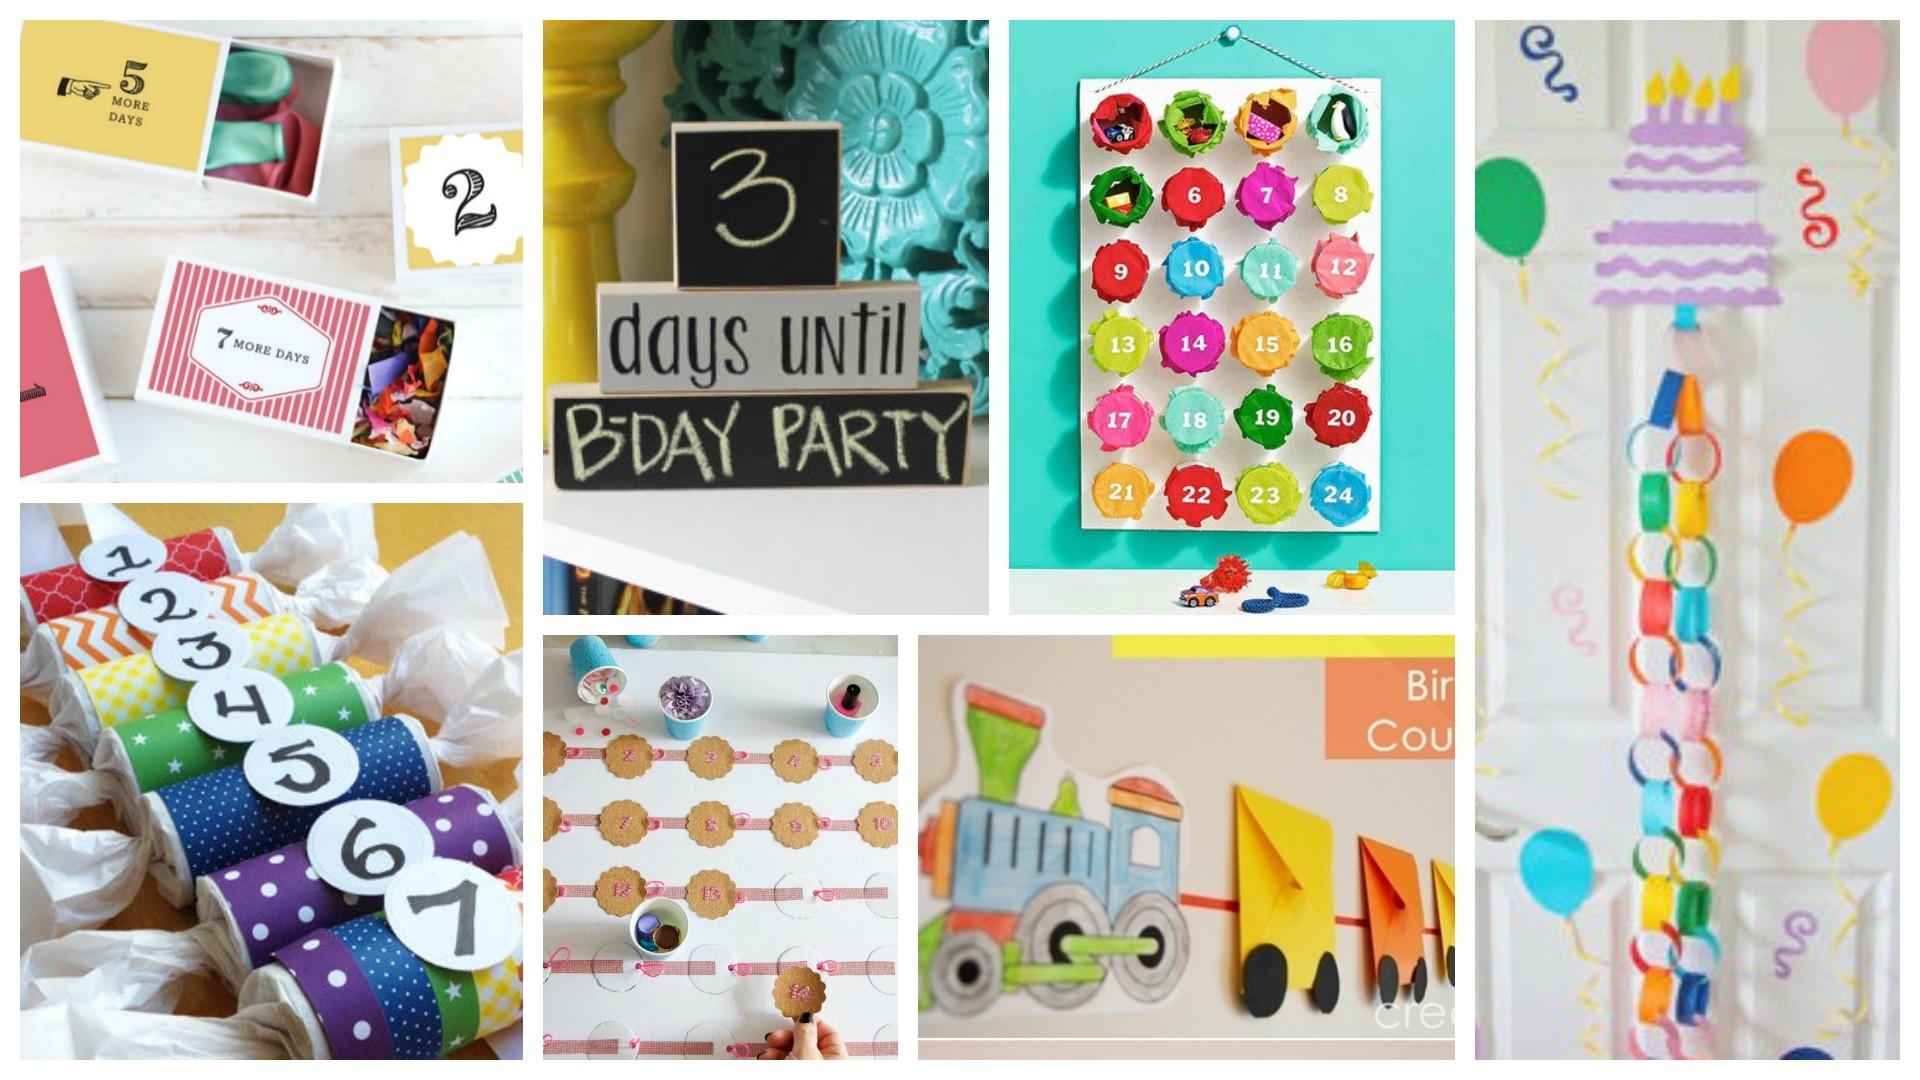 13 Diy Birthday Countdown Ideas Your Kid Will Love With Unique Ideas For A Countdown Calendar